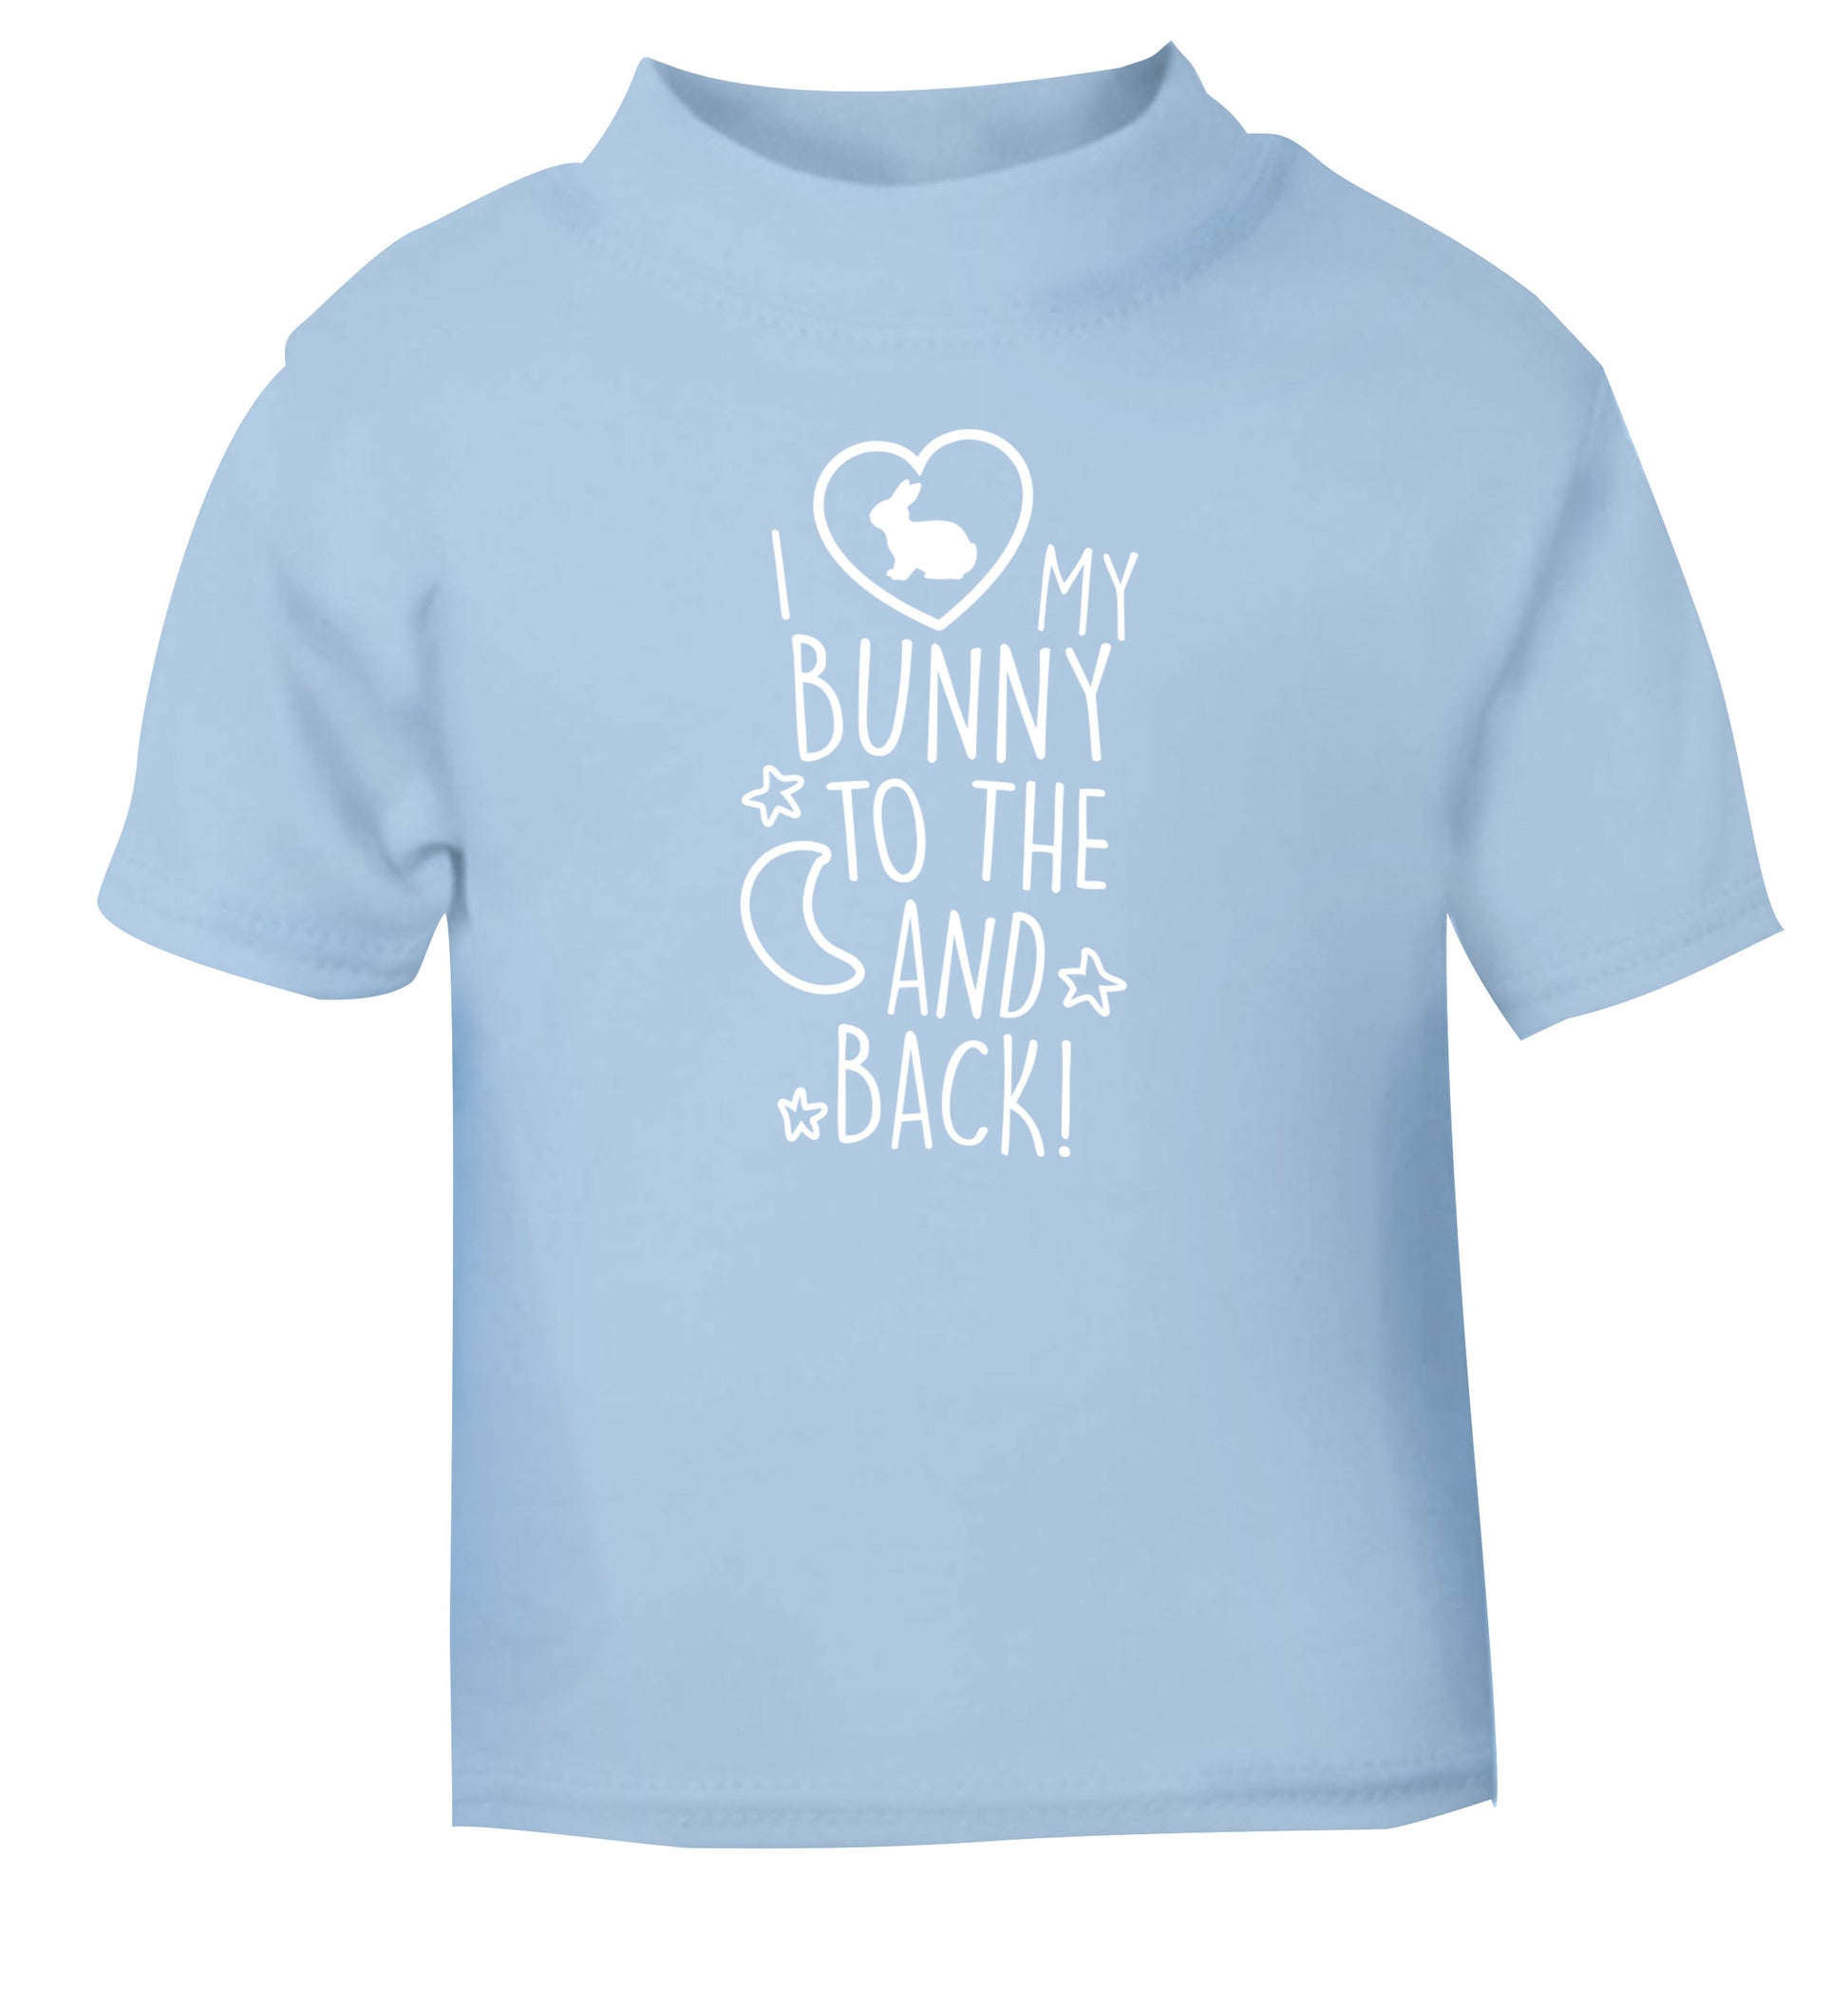 I love my bunny to the moon and back light blue Baby Toddler Tshirt 2 Years